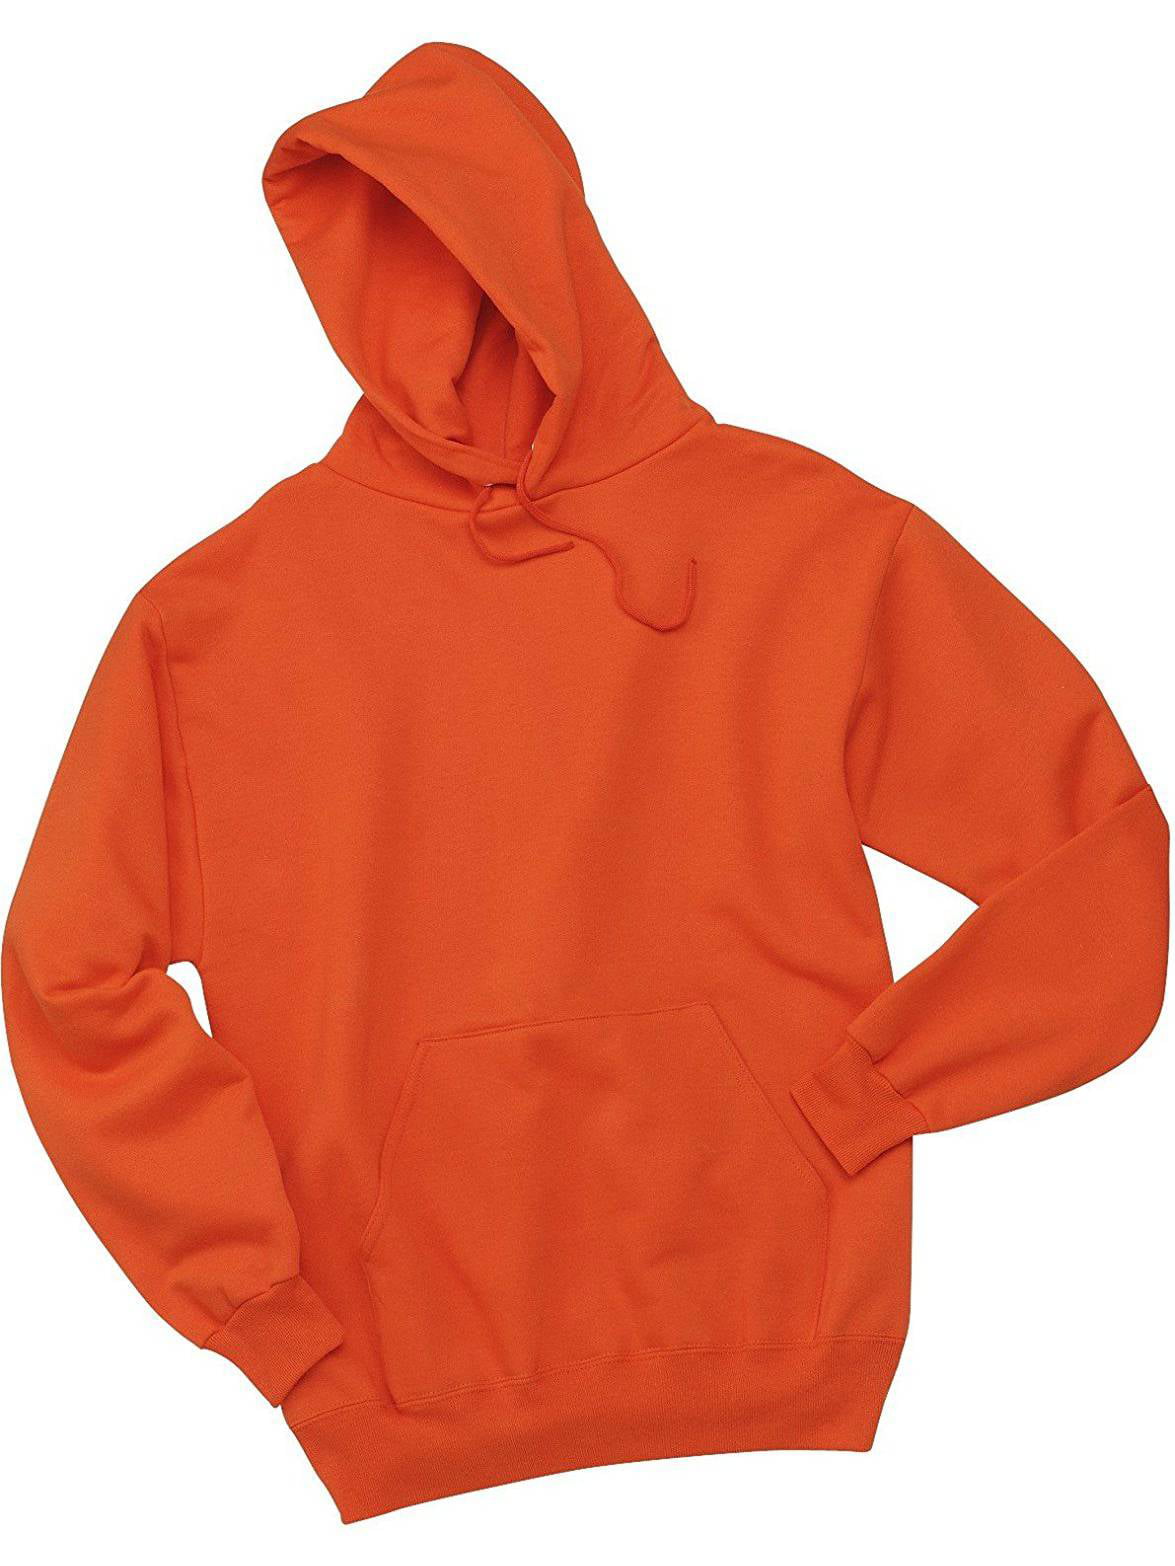 Jerzees Adult Double Lined Hooded Pullover, Burnt Orange, X-Large ...